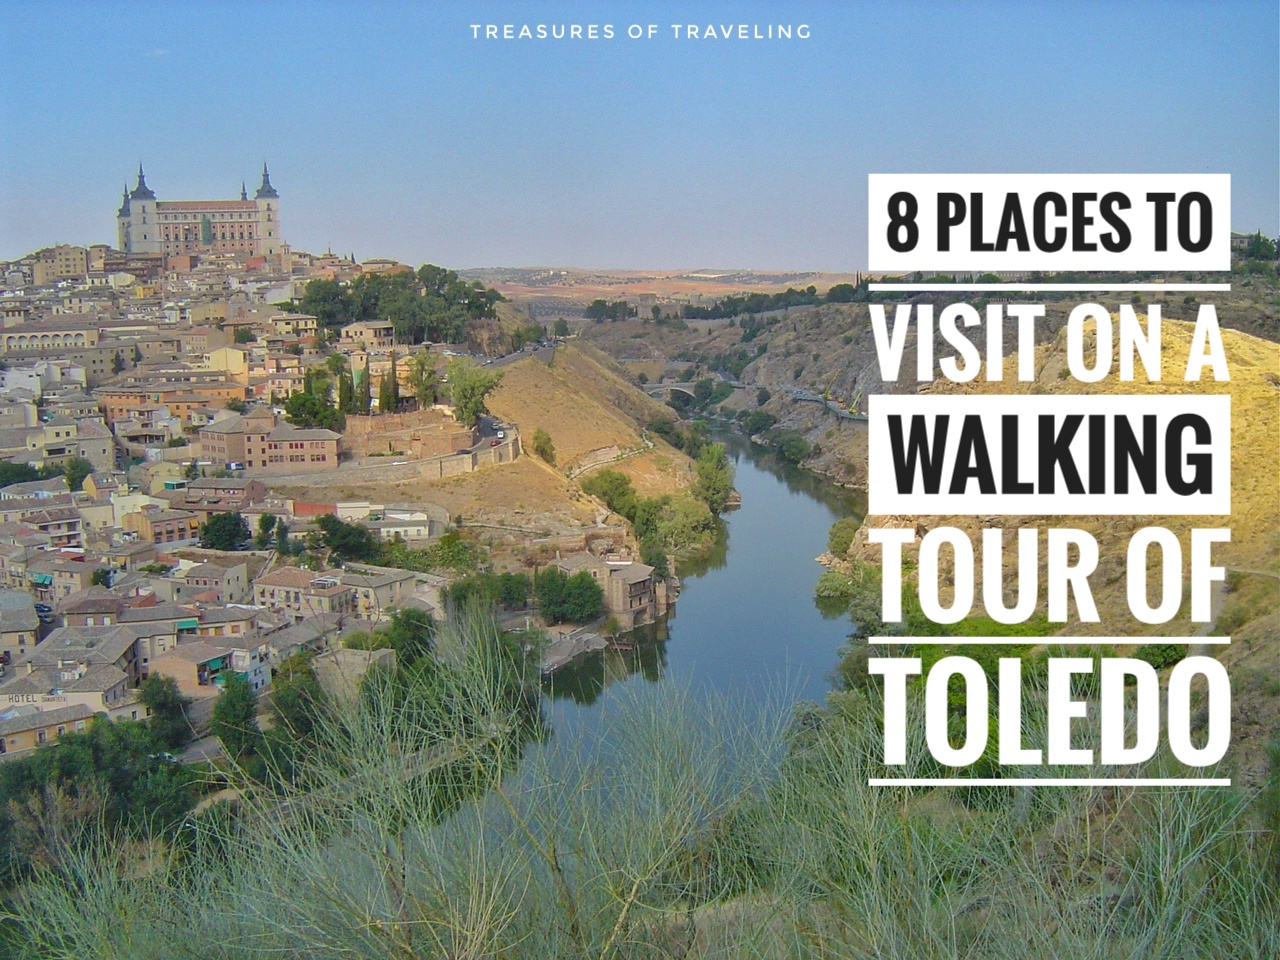 8 Places to Visit on a Walking Tour of Toledo!